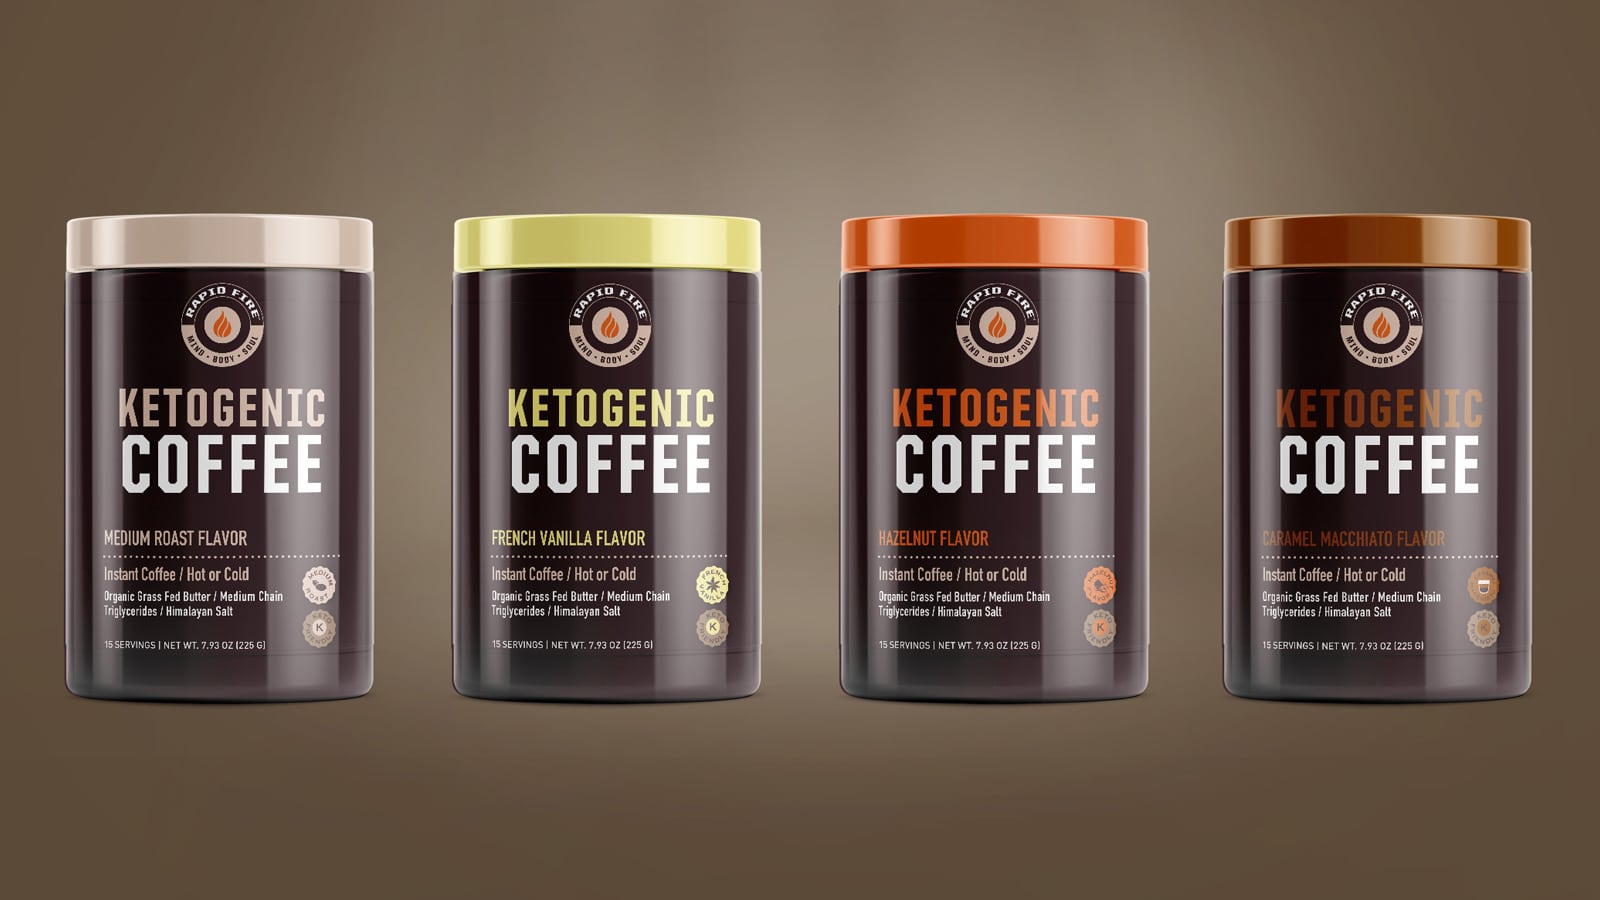 Rapid Fire ketogenic coffee packaging design with pops of color for the lids and brown containers arranged in a line.